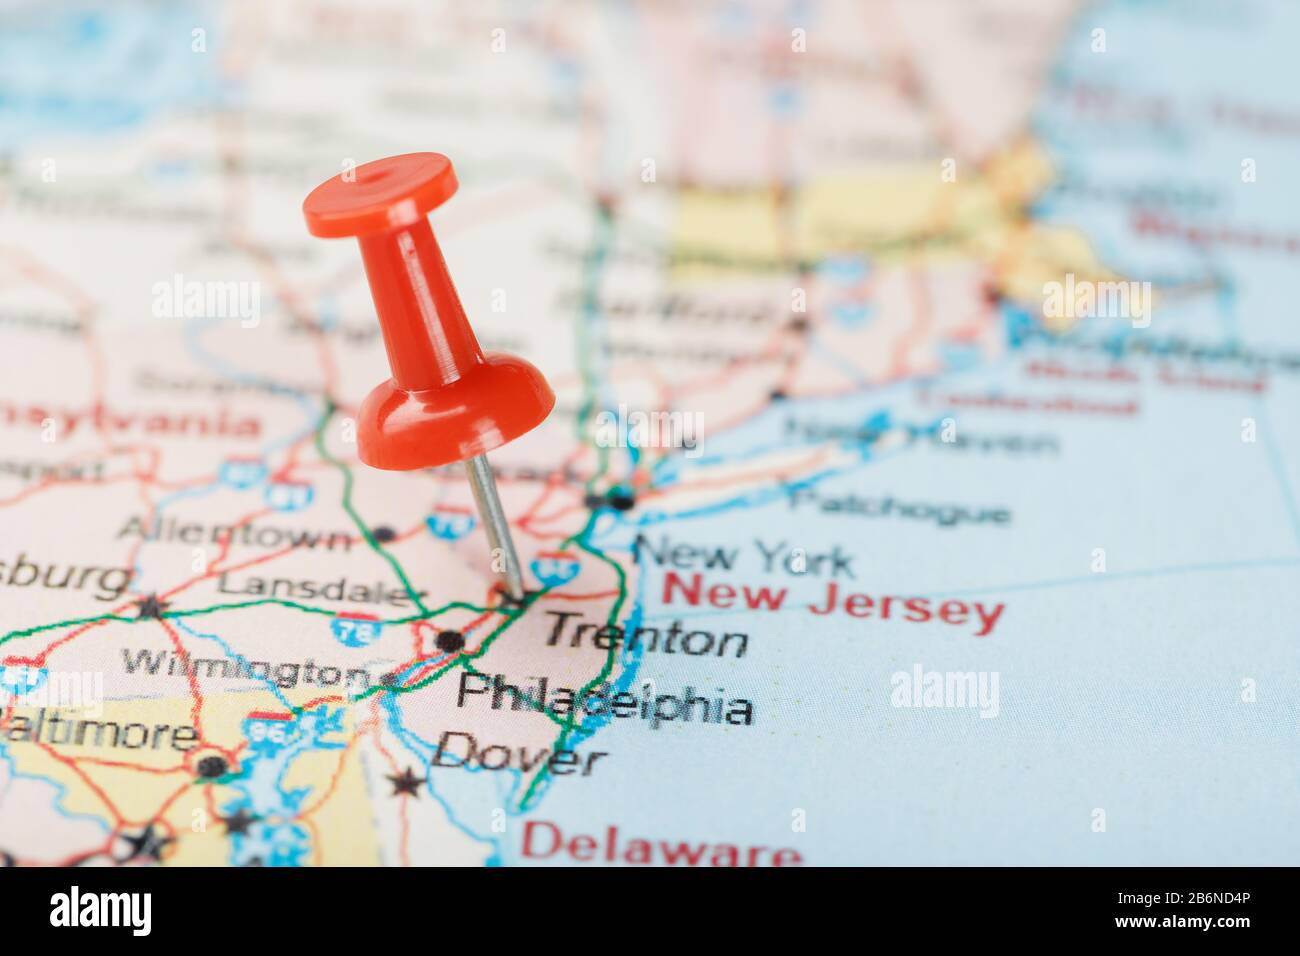 Red Clerical Needle On A Map Of Usa South New Jersey And The Capital Trenton Close Up Map Of South New Jersey With Red Tack United States Map Pin U Stock Photo